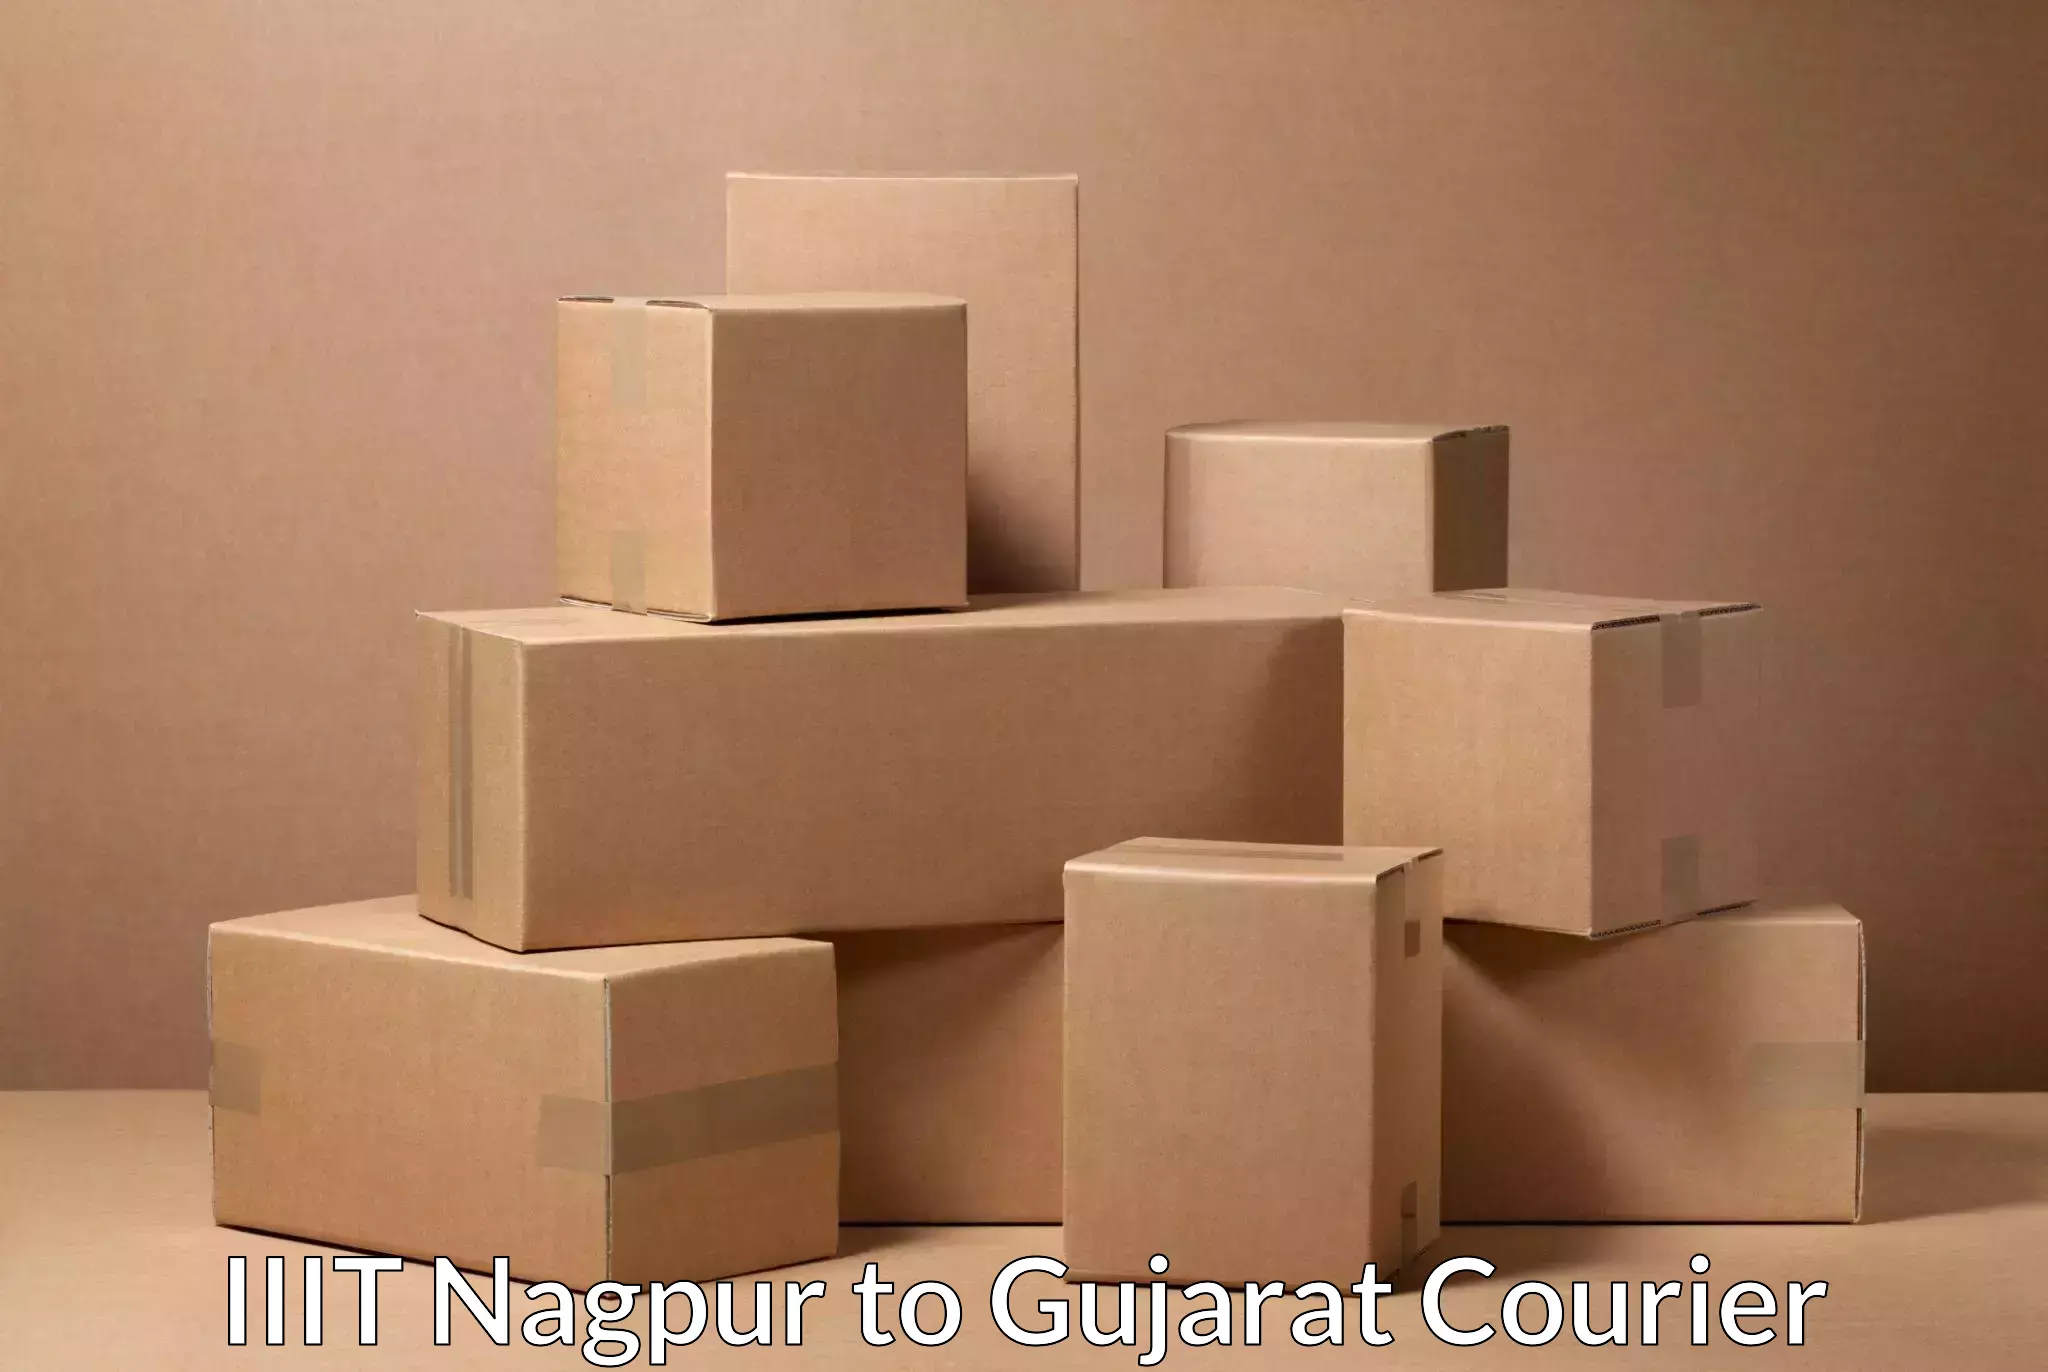 Quality courier partnerships IIIT Nagpur to Gujarat